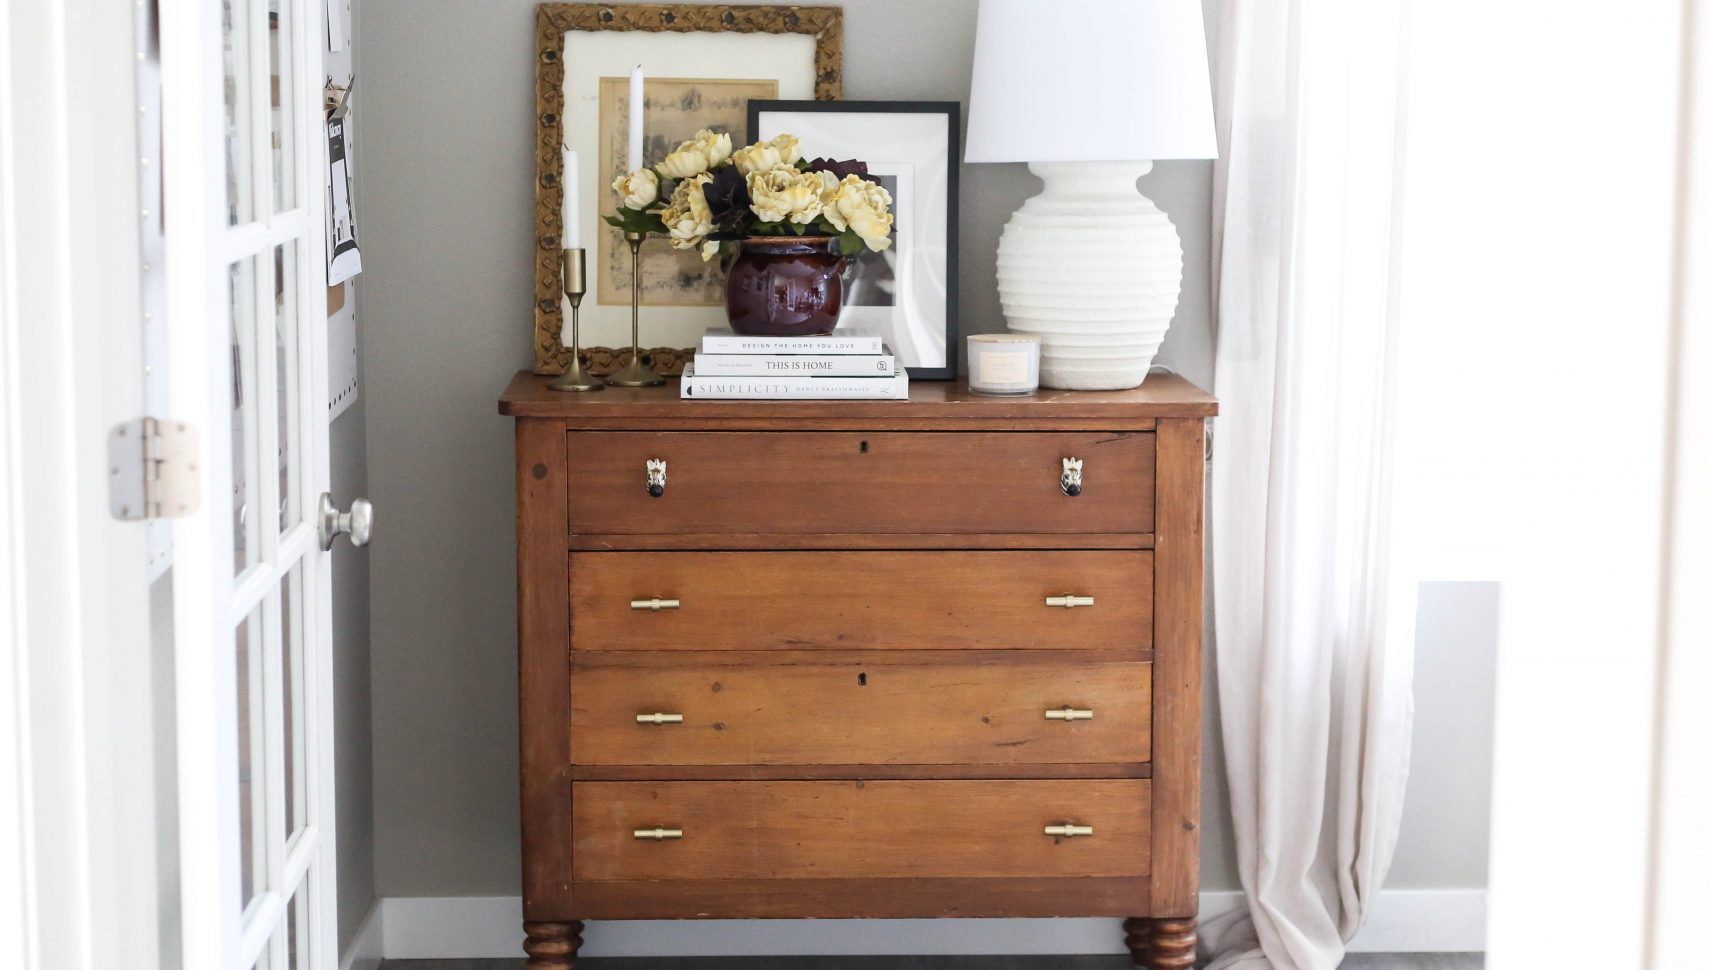 How to style vintage decor